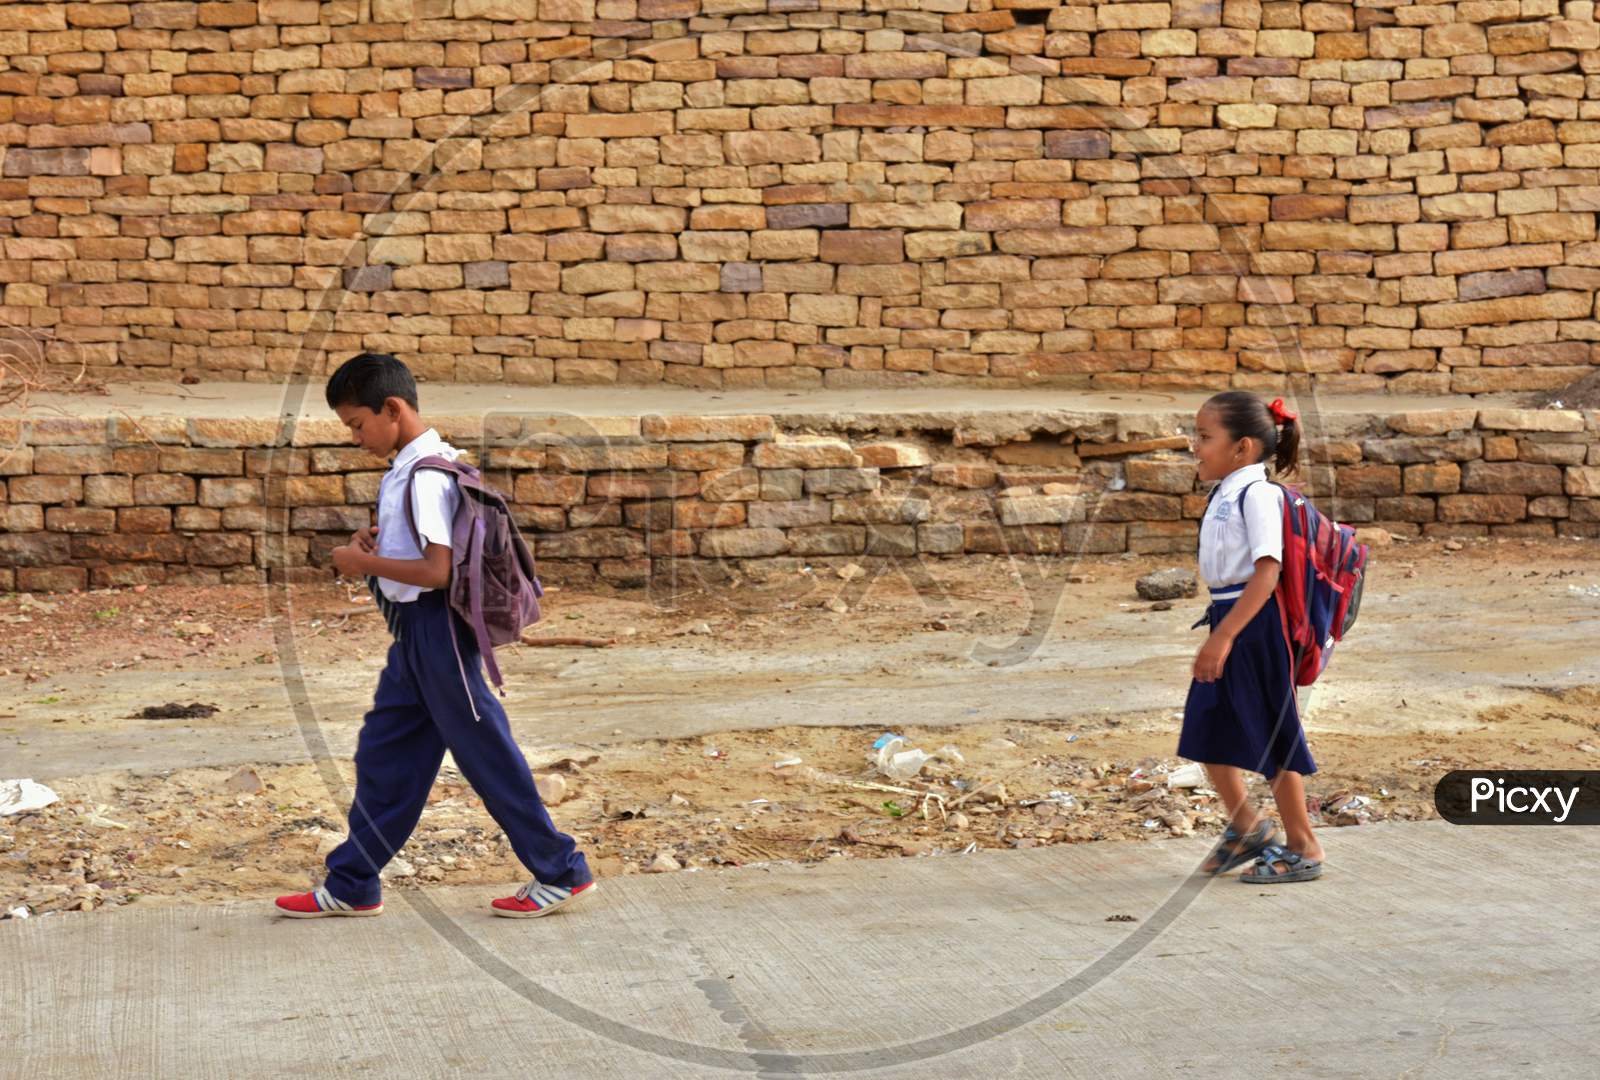 Two Children in their School Dress with school bag on their shoulder heading towards school and the pattern of bricks forming the back ground